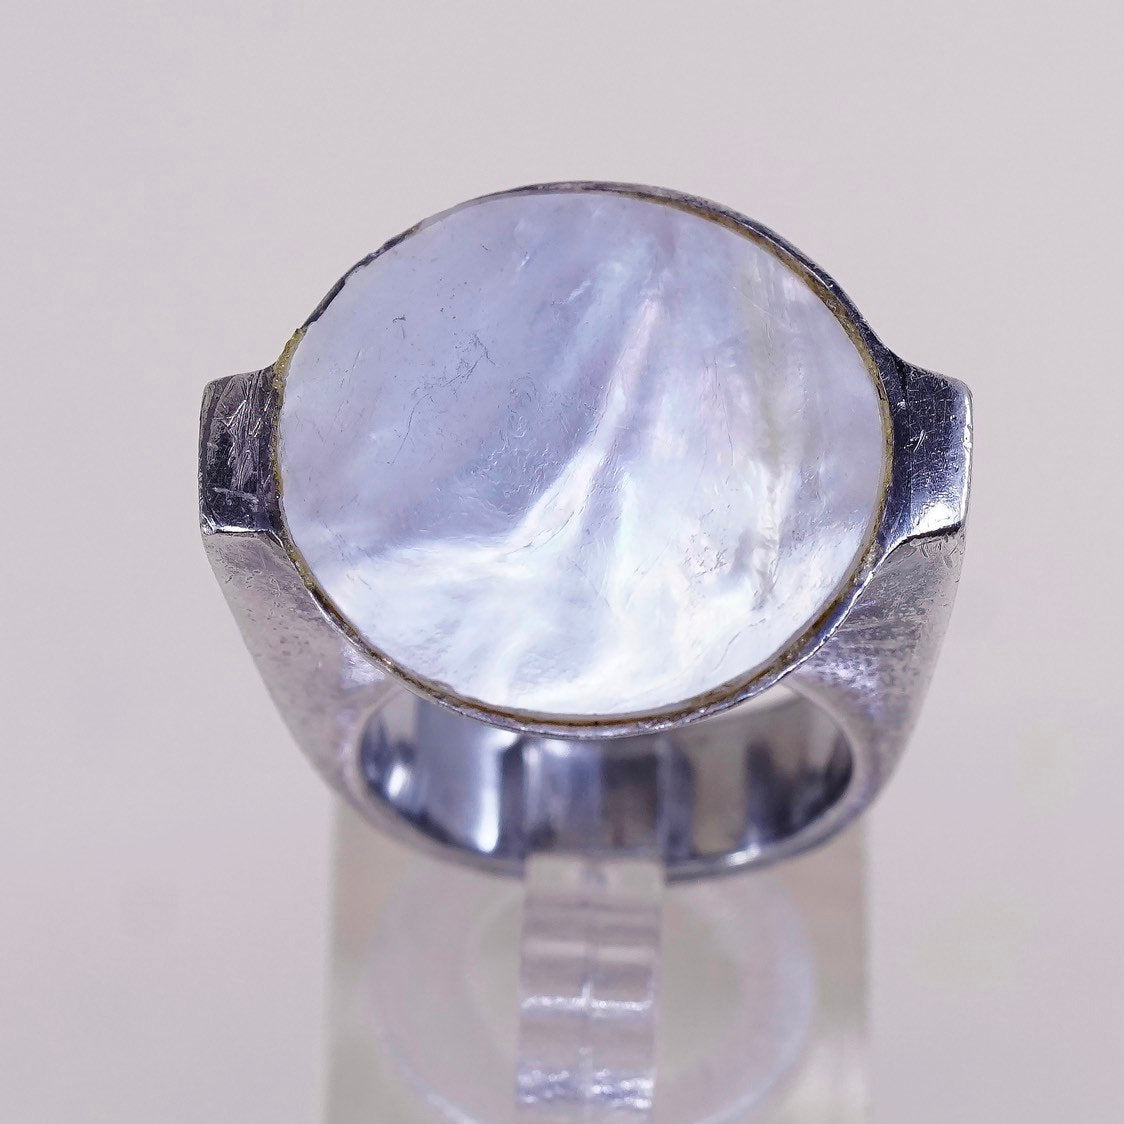 sz 6, vtg sterling 925 silver handmade cocktail ring, w/ MOP inlay, stamped 925